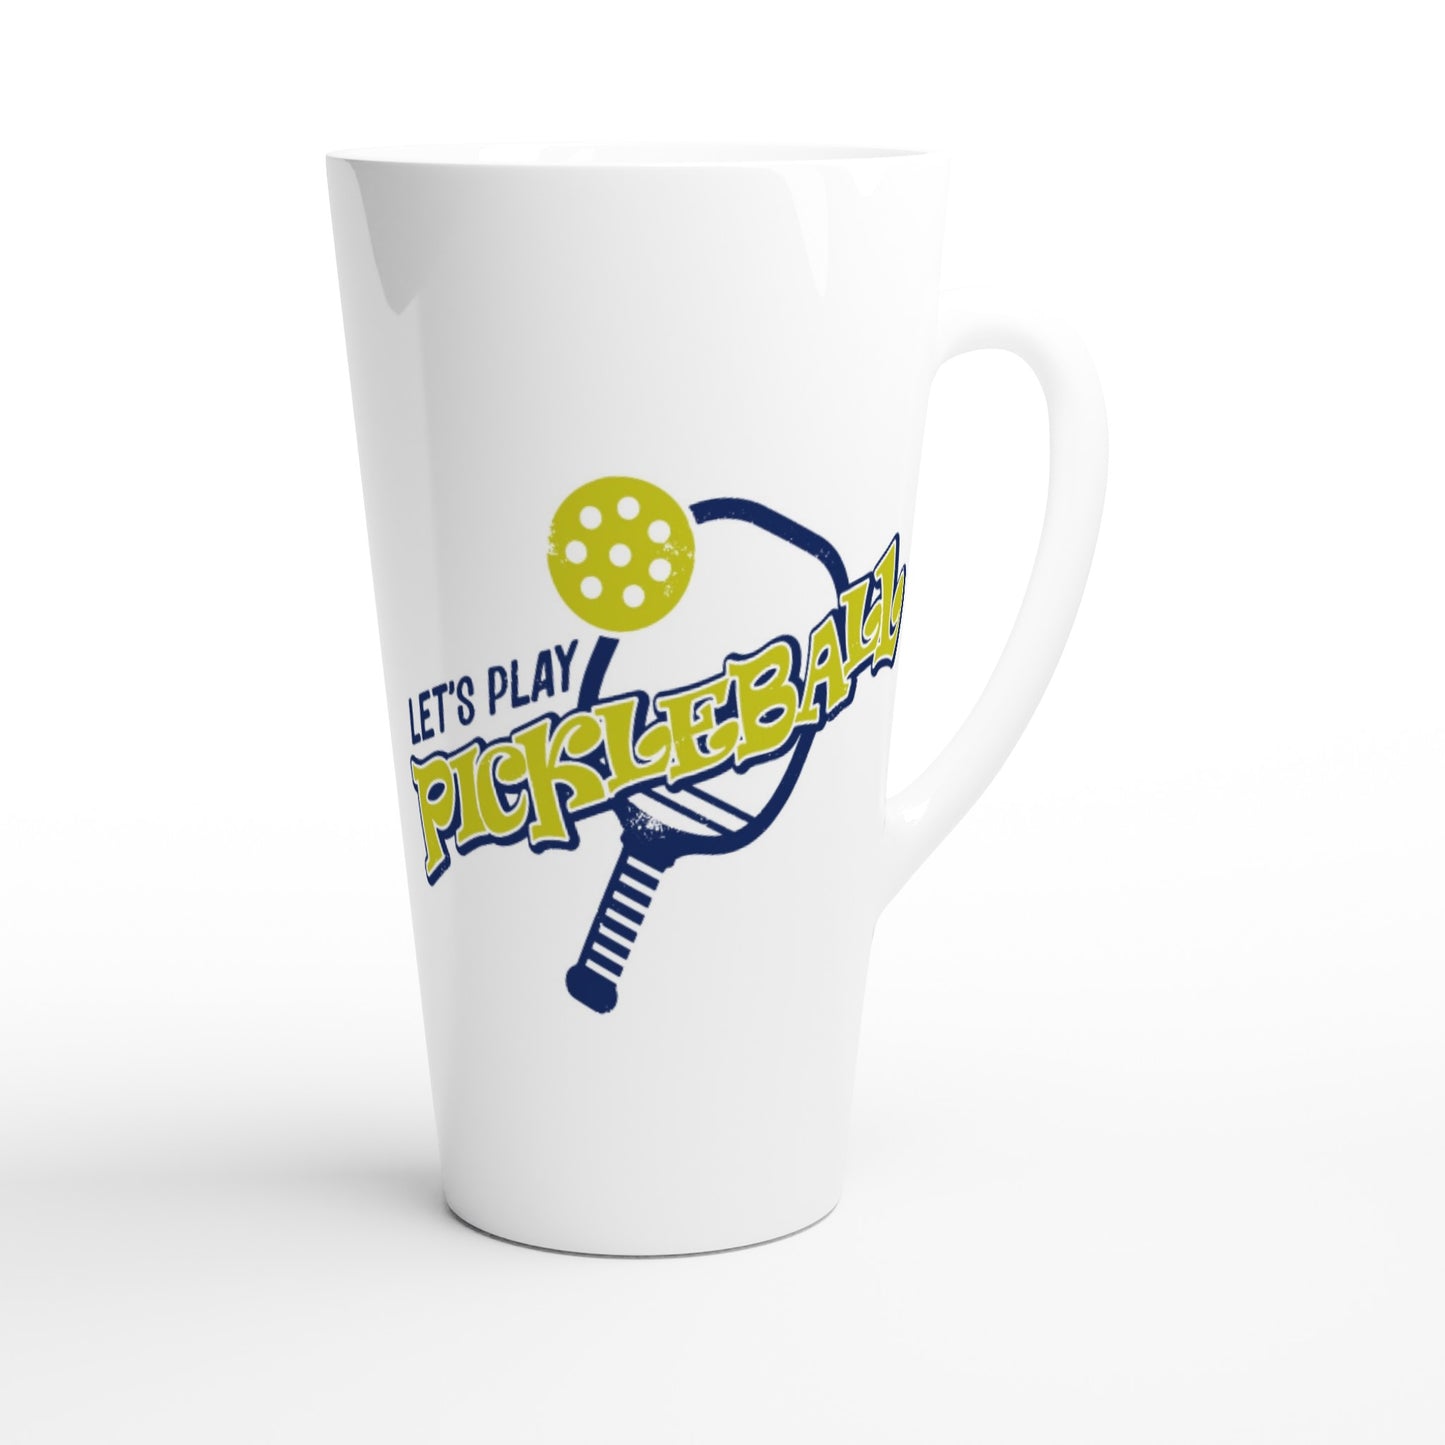 Personalized Seventeener white ceramic 17oz mug with original personalized motto [Your Name] Would be a PickleBall SuperStar if they could stay out of the Darn Kitchen! on front and Let’s Play Pickleball logo on back coffee mug dishwasher and microwave safe from WhatYa Say Apparel back view.